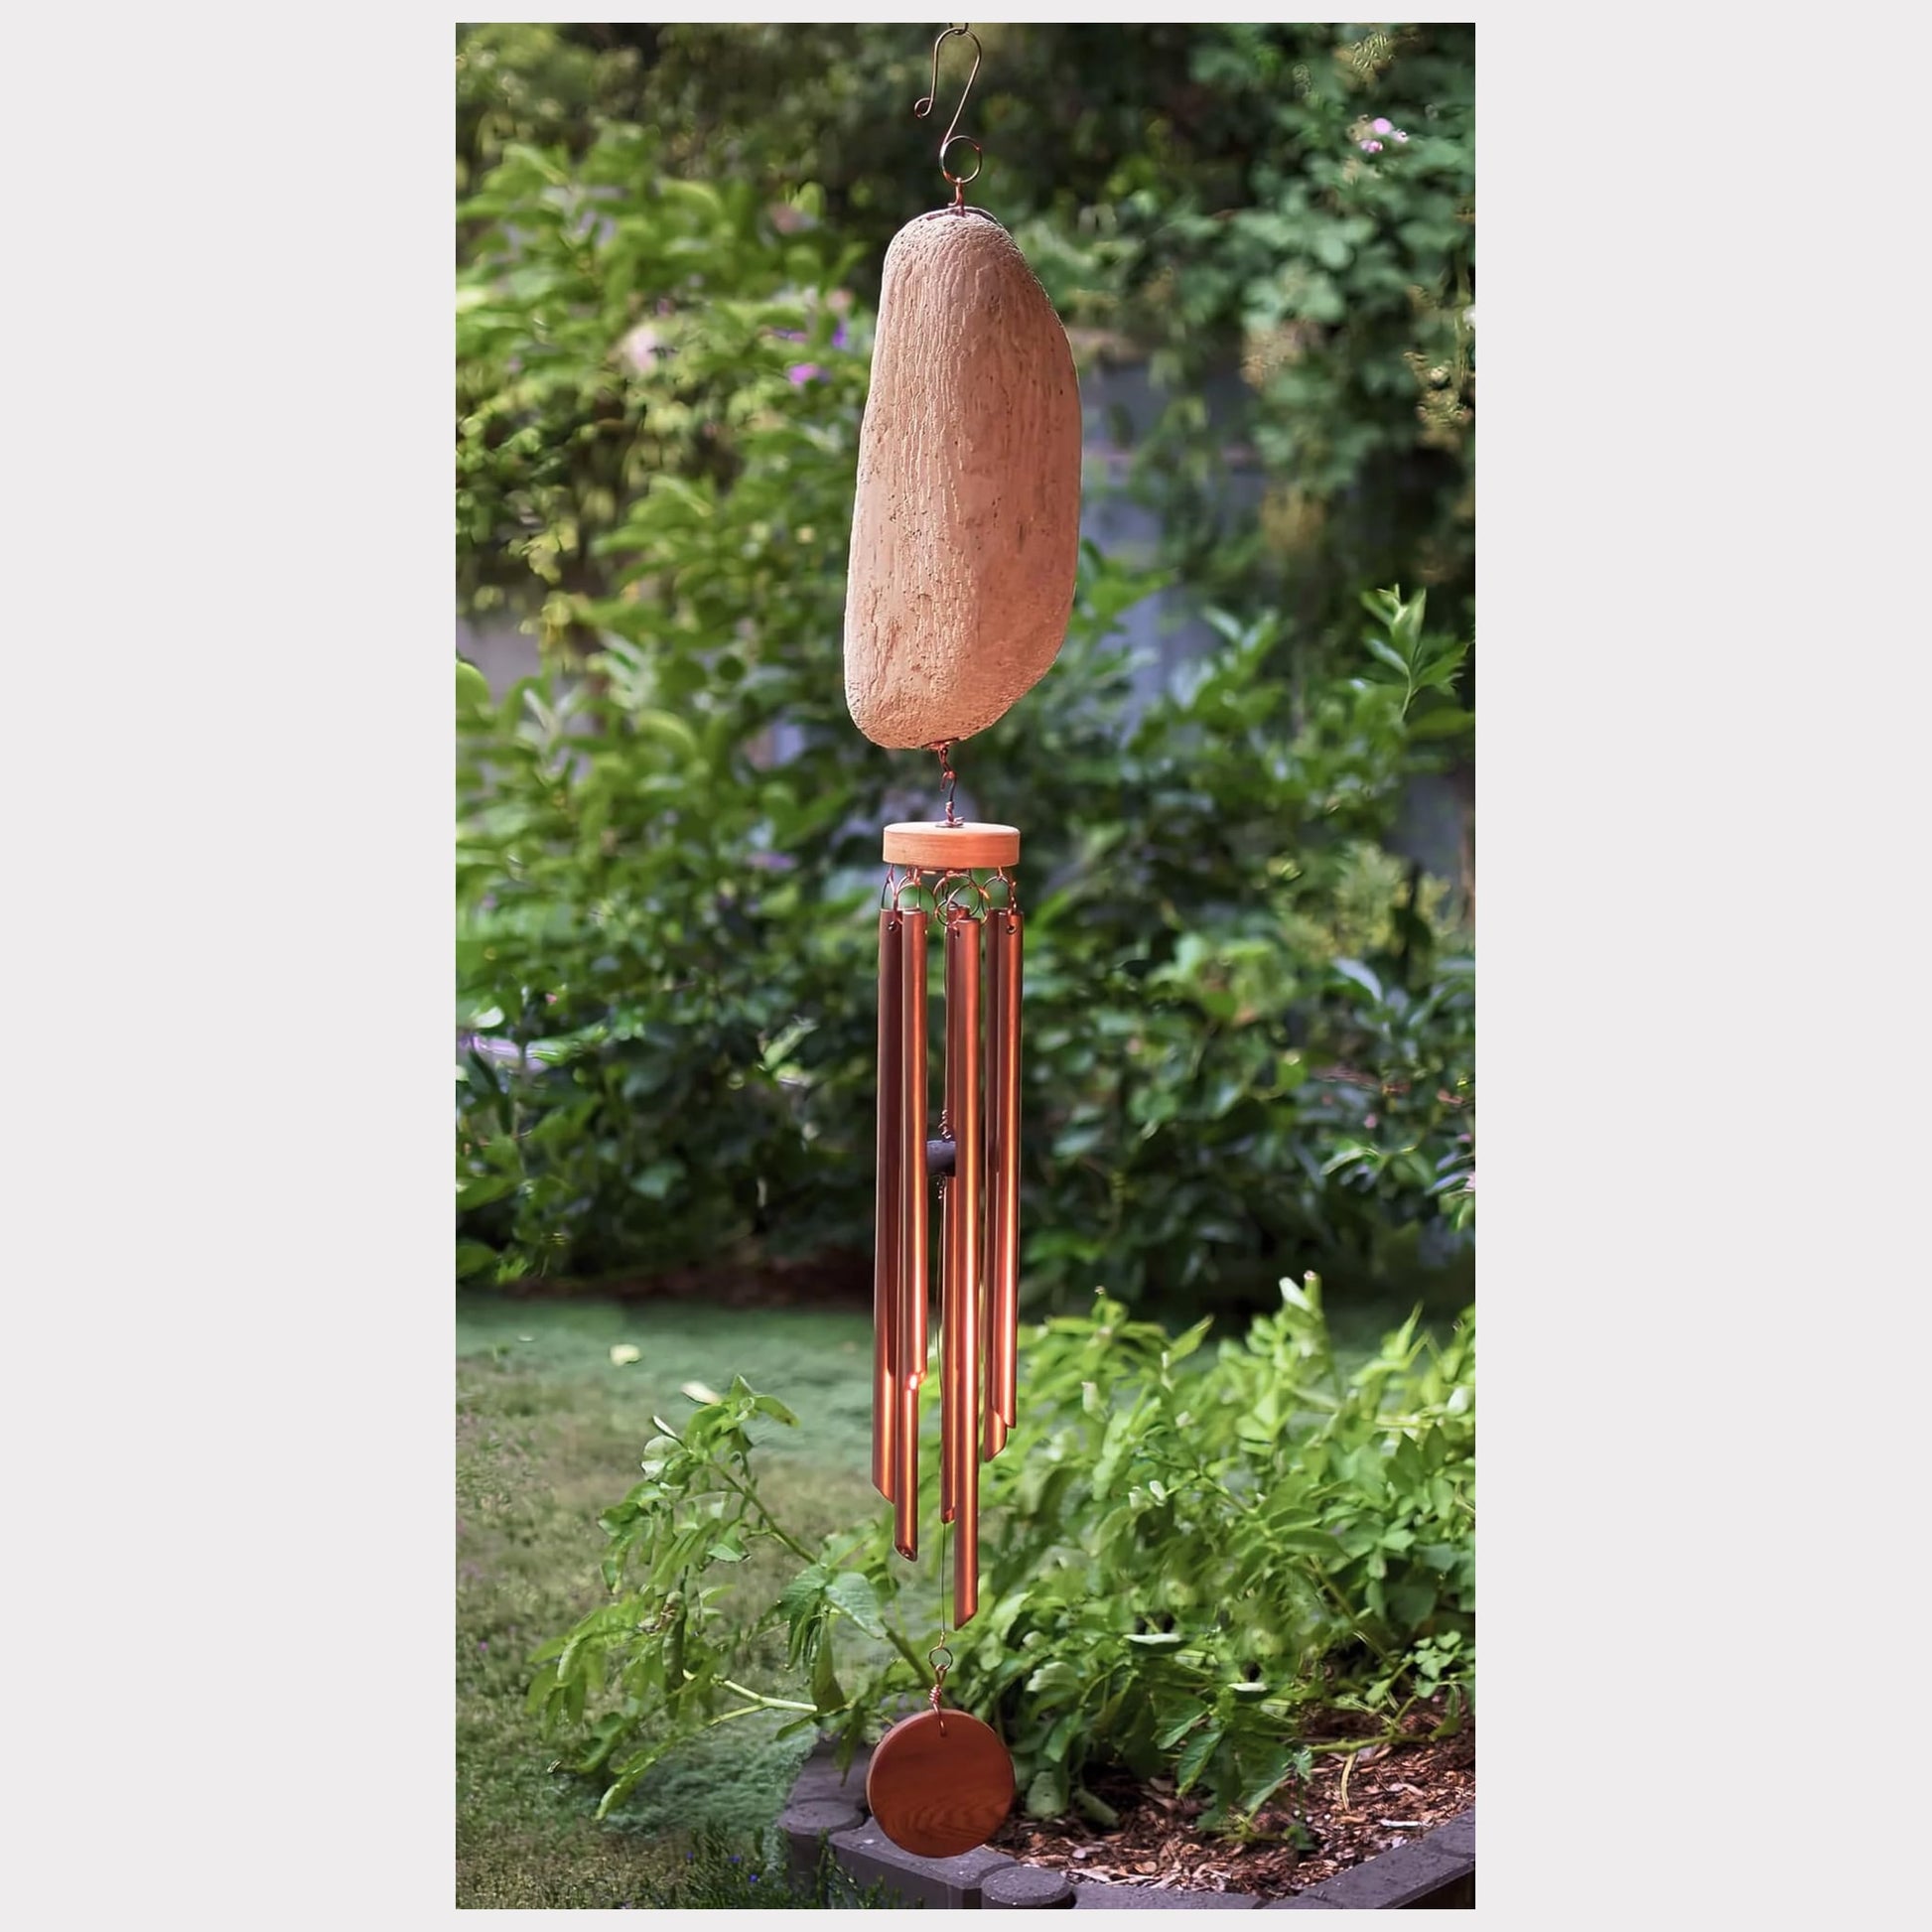 Large rustic driftwood wind chime with seven copper chimes, handcrafted.